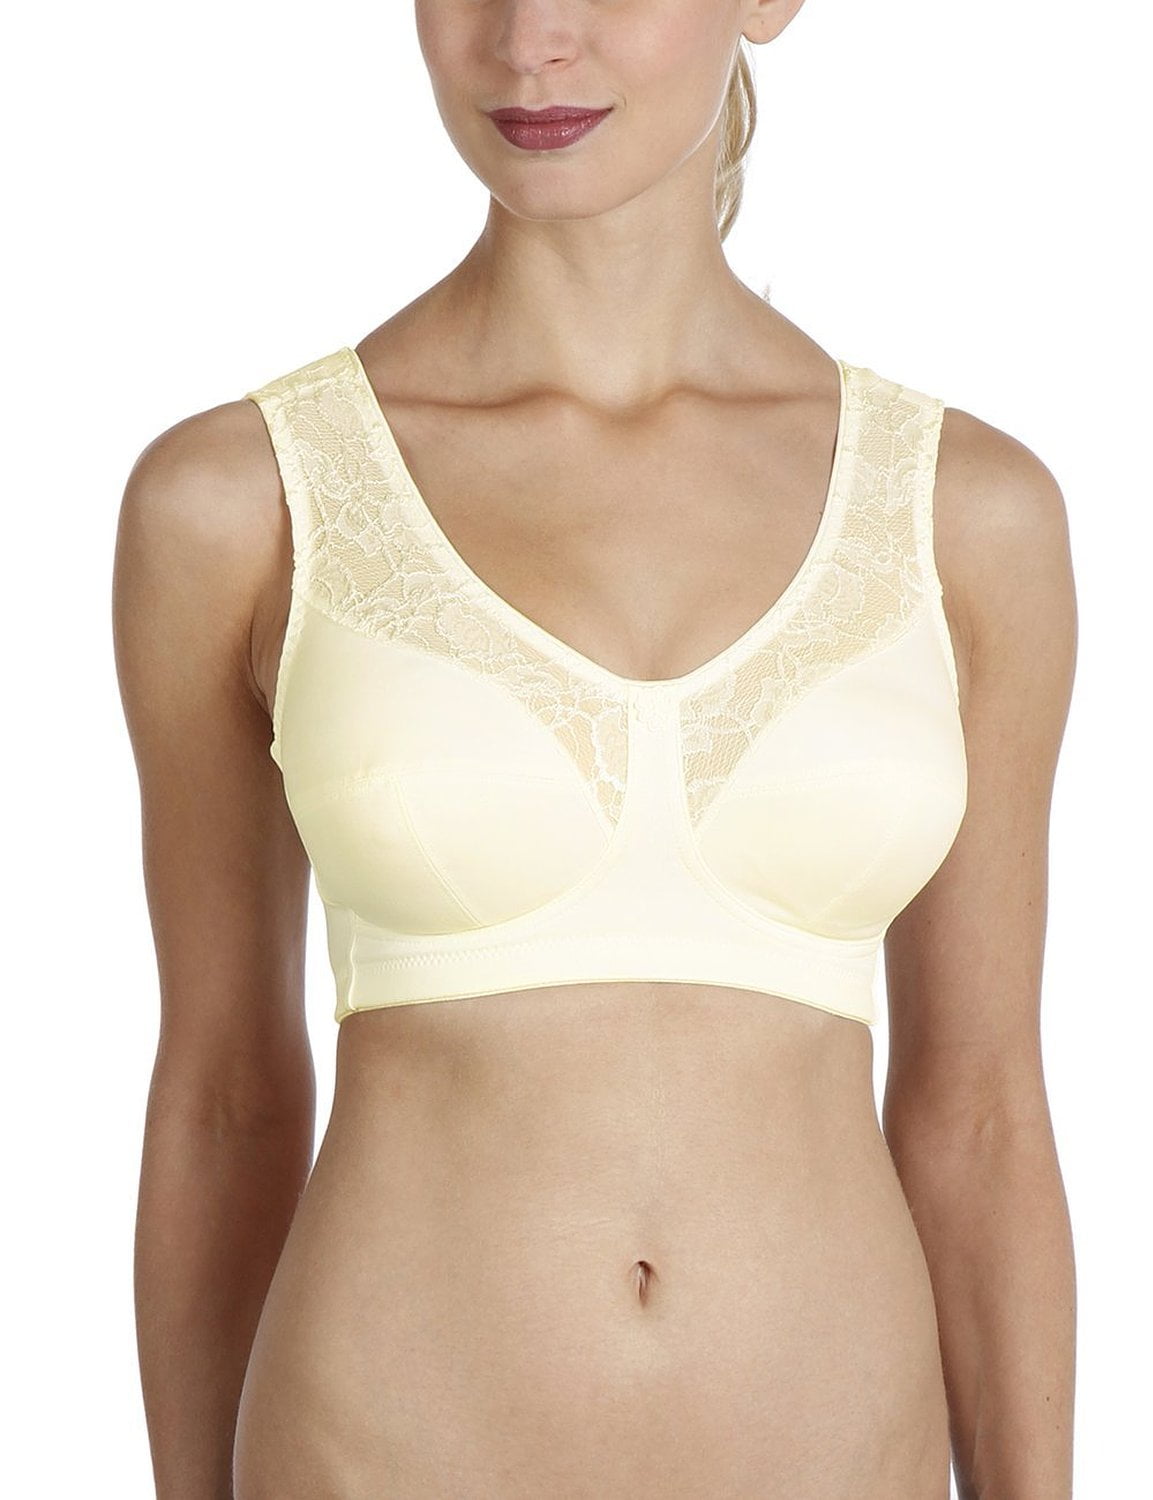 CHAMPAGNE,WHITE SOFT CUP TOP COMFORT BRA FRIM SUPPORT ANITA AMICA AN 5420 